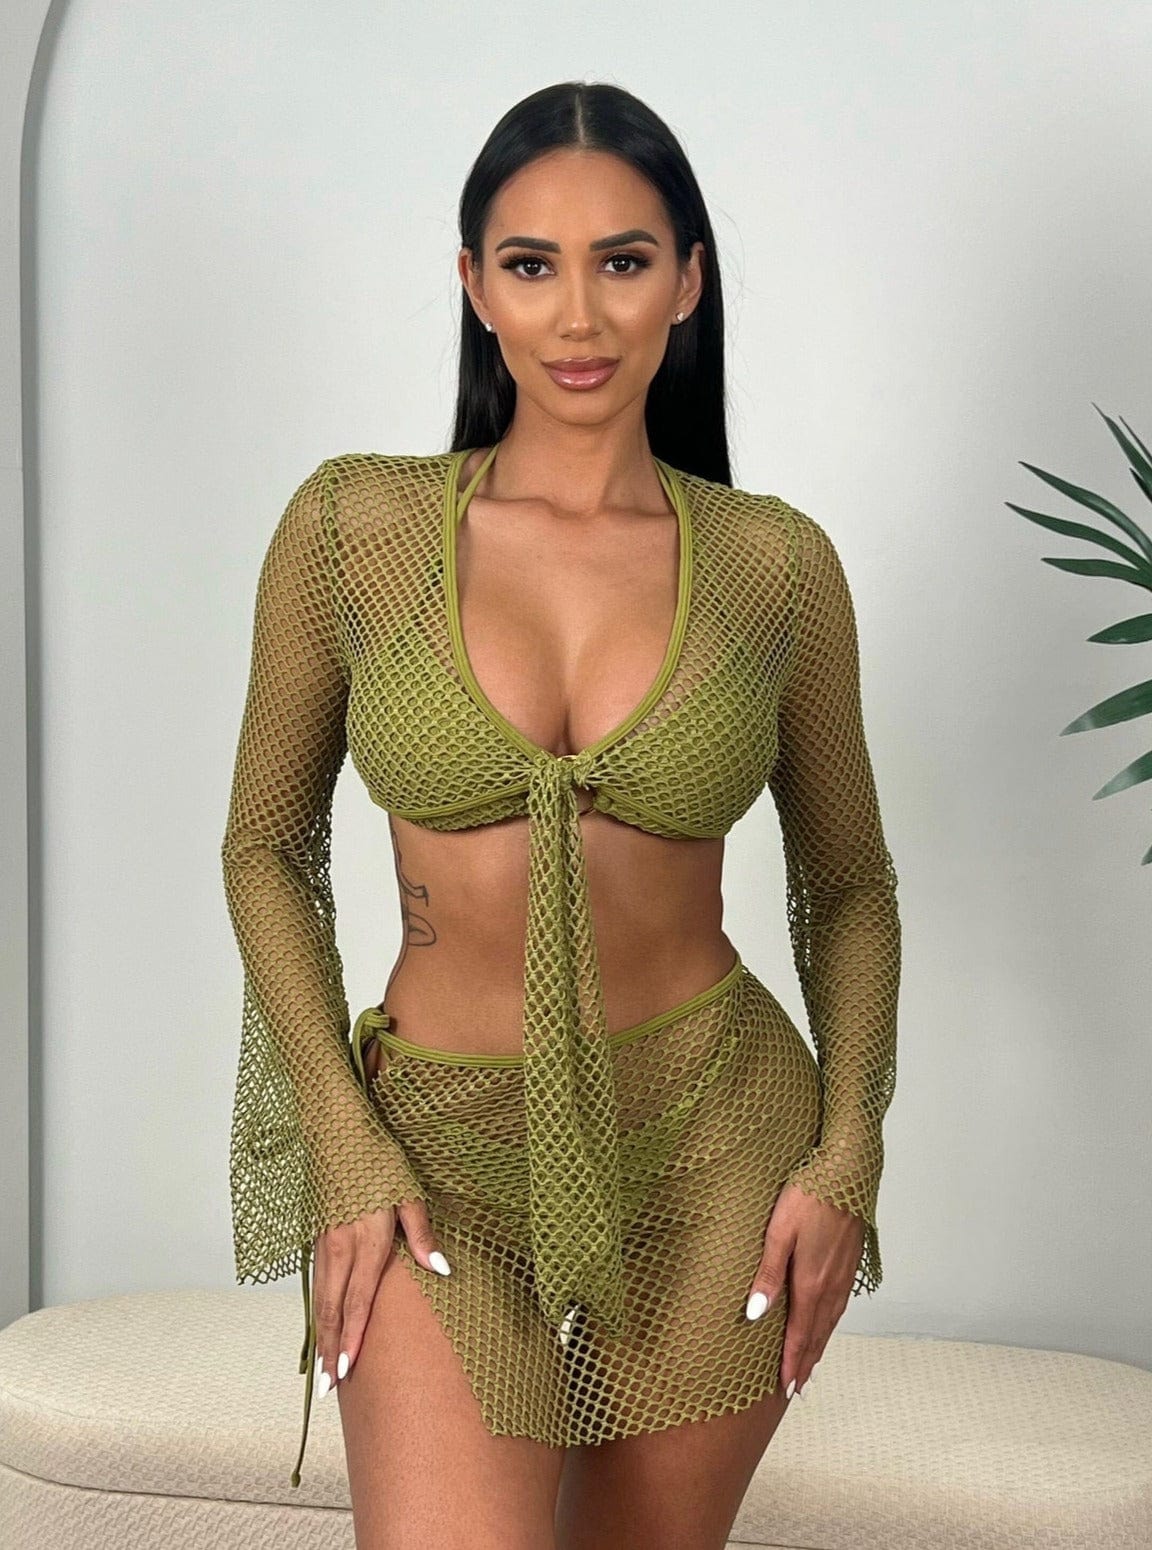 Berry Beachy Swimwear Apparel & Accessories > Clothing > Skirts 2 Pc. Tulum Tan Mesh Net Tie Front Top & Skirt Beach Cover-Up Set 2023 Sexy Tan Nude Berry Beachy Swimwear Tulum Net Skirt Top Set